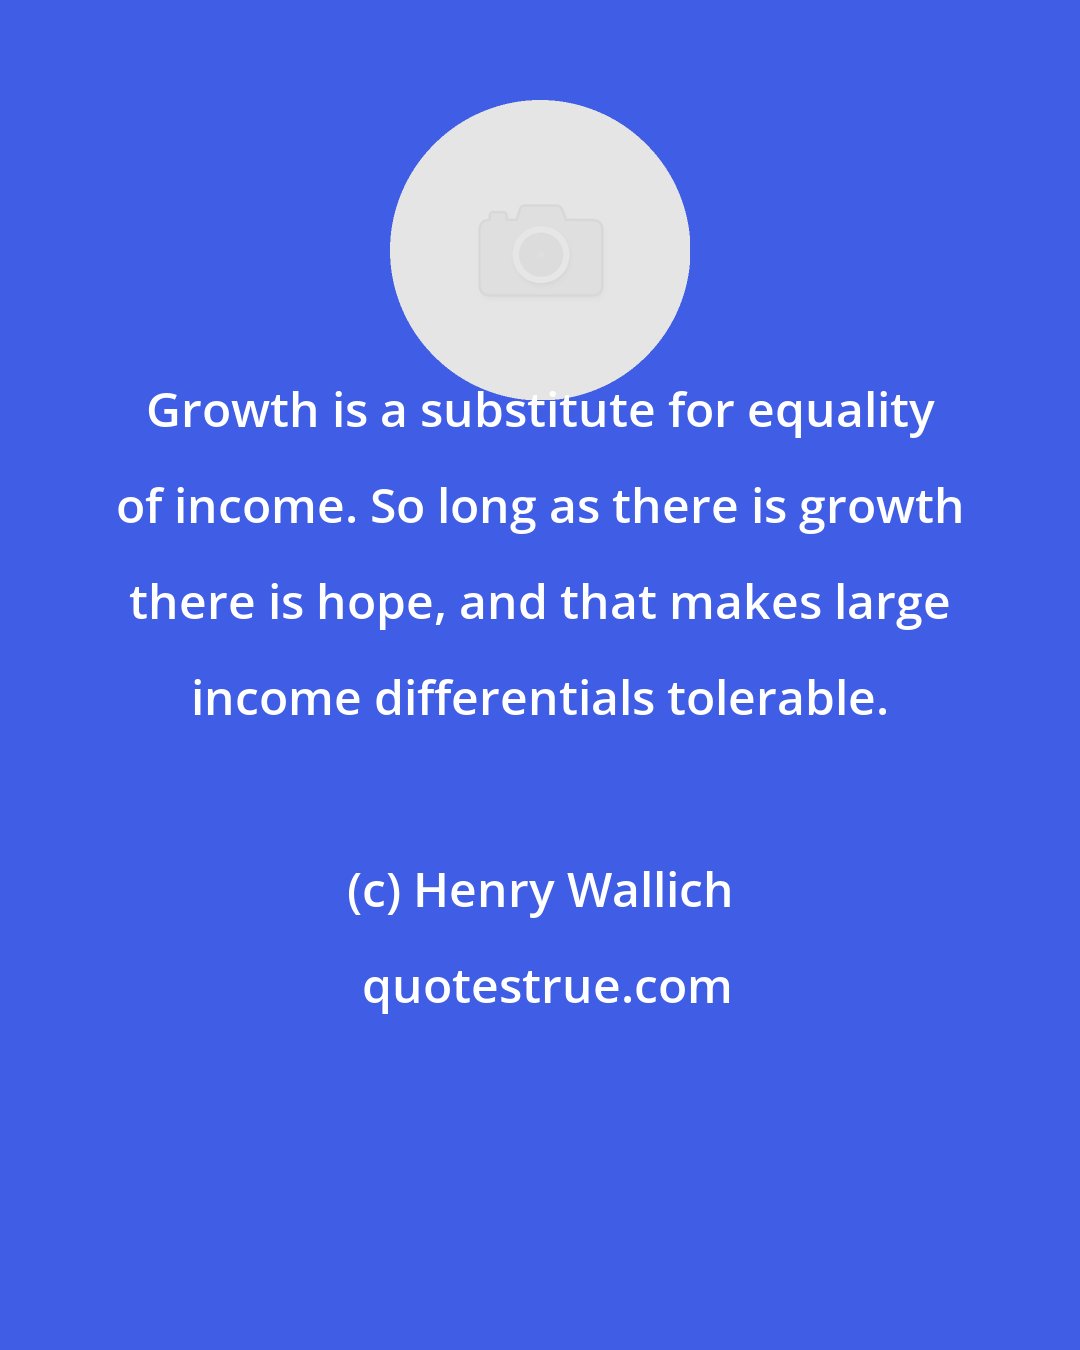 Henry Wallich: Growth is a substitute for equality of income. So long as there is growth there is hope, and that makes large income differentials tolerable.